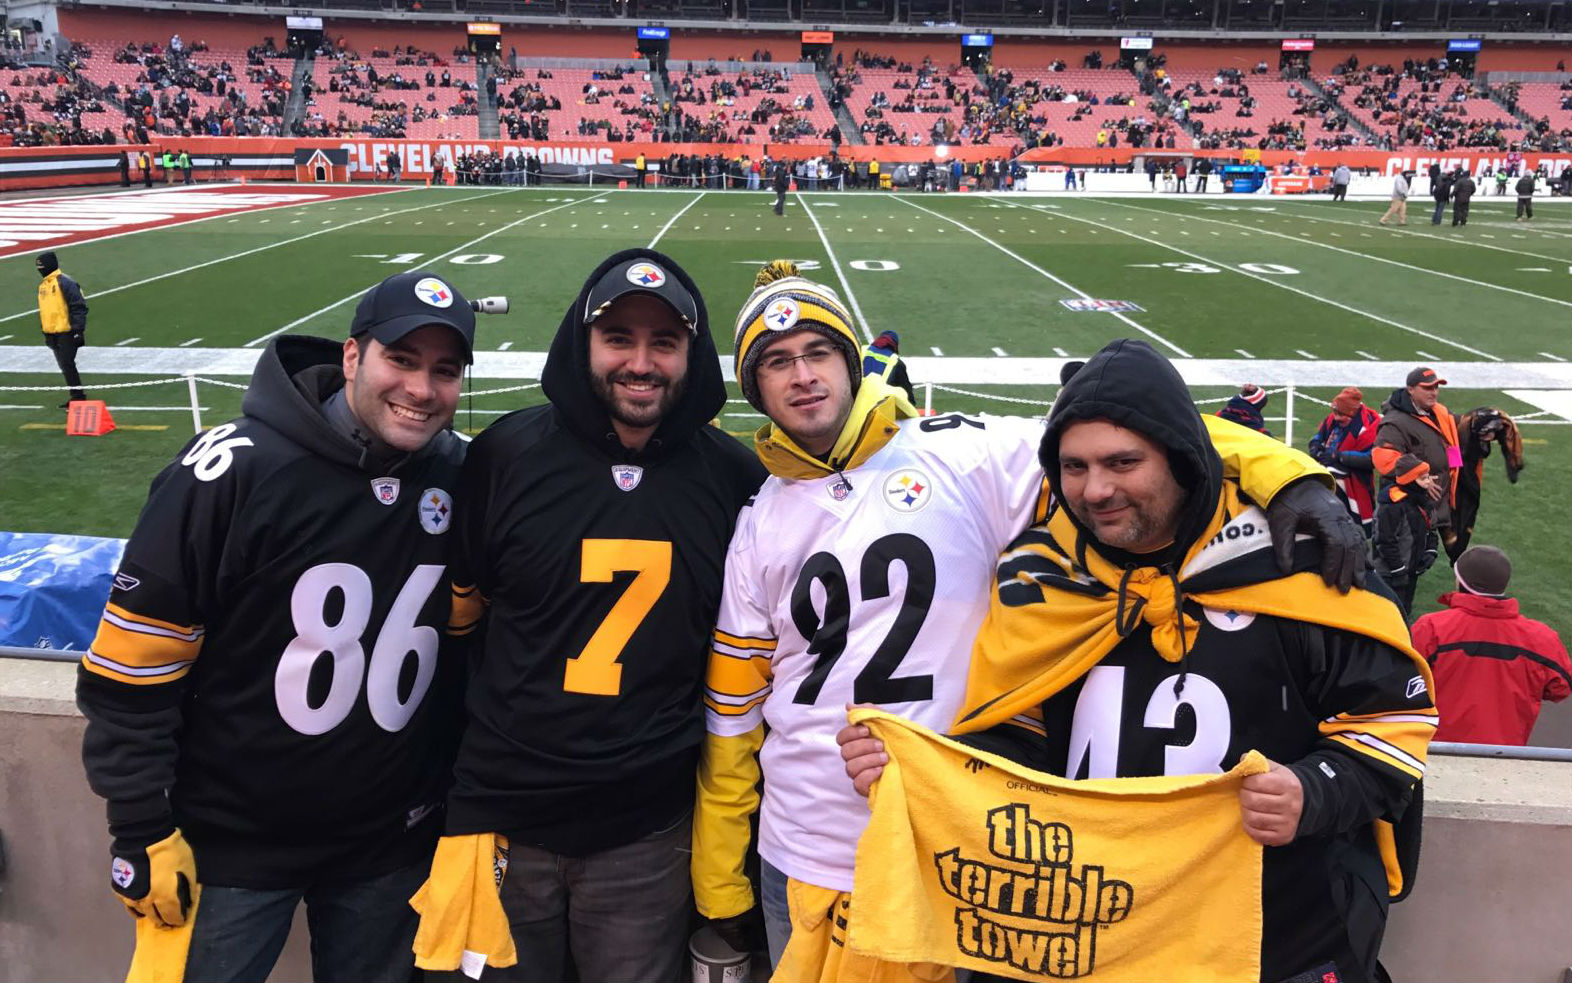 Steelers fans say team shows signs of scrambling